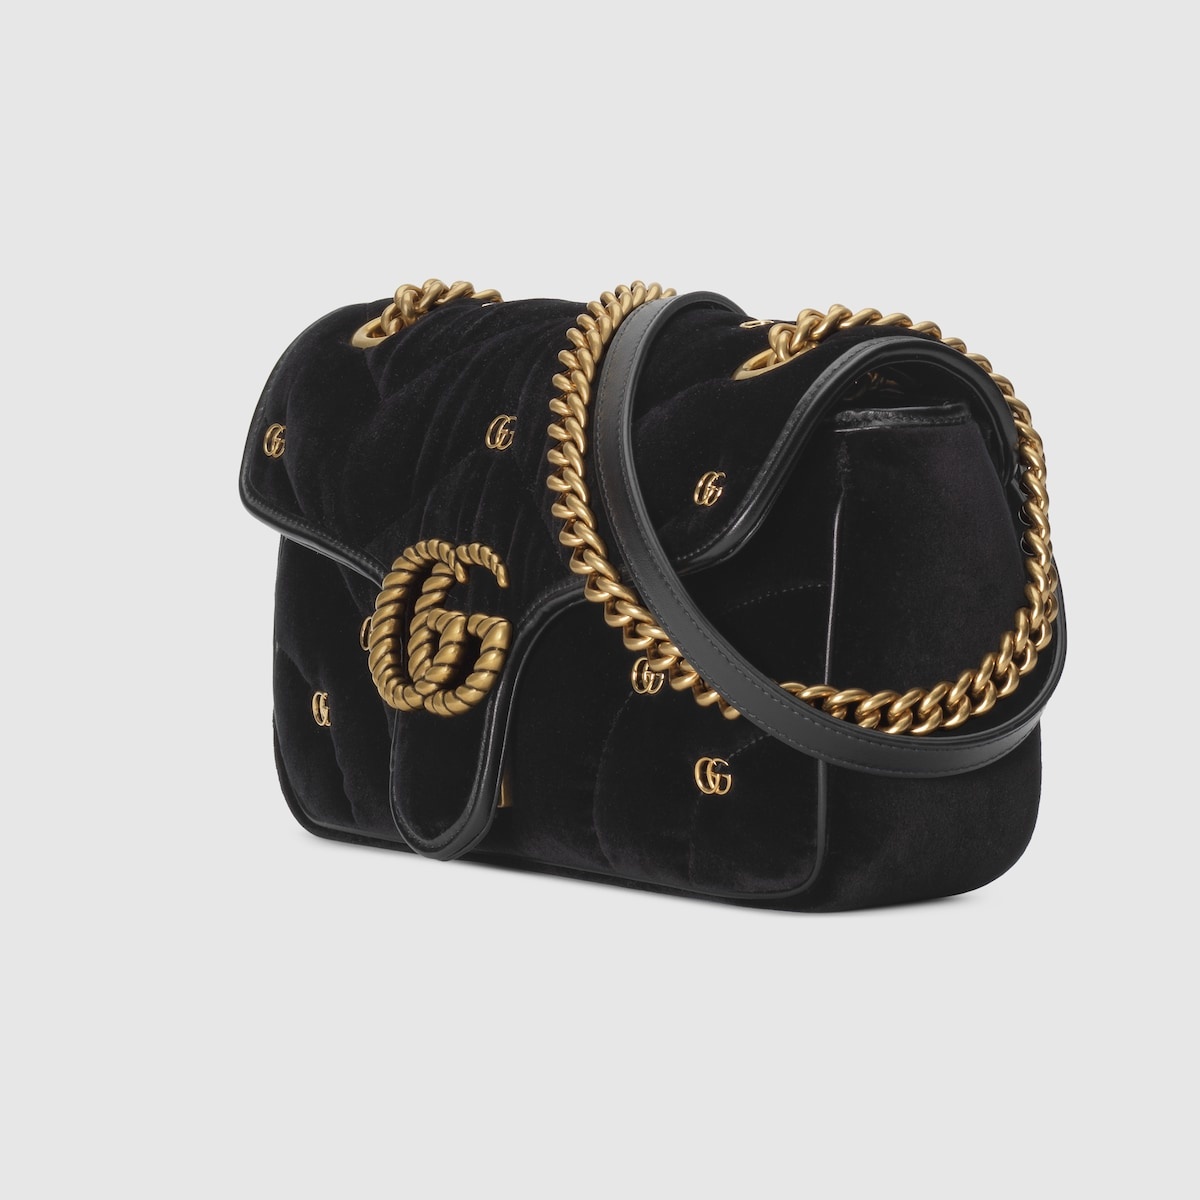 GG Marmont small shoulder bag - 1